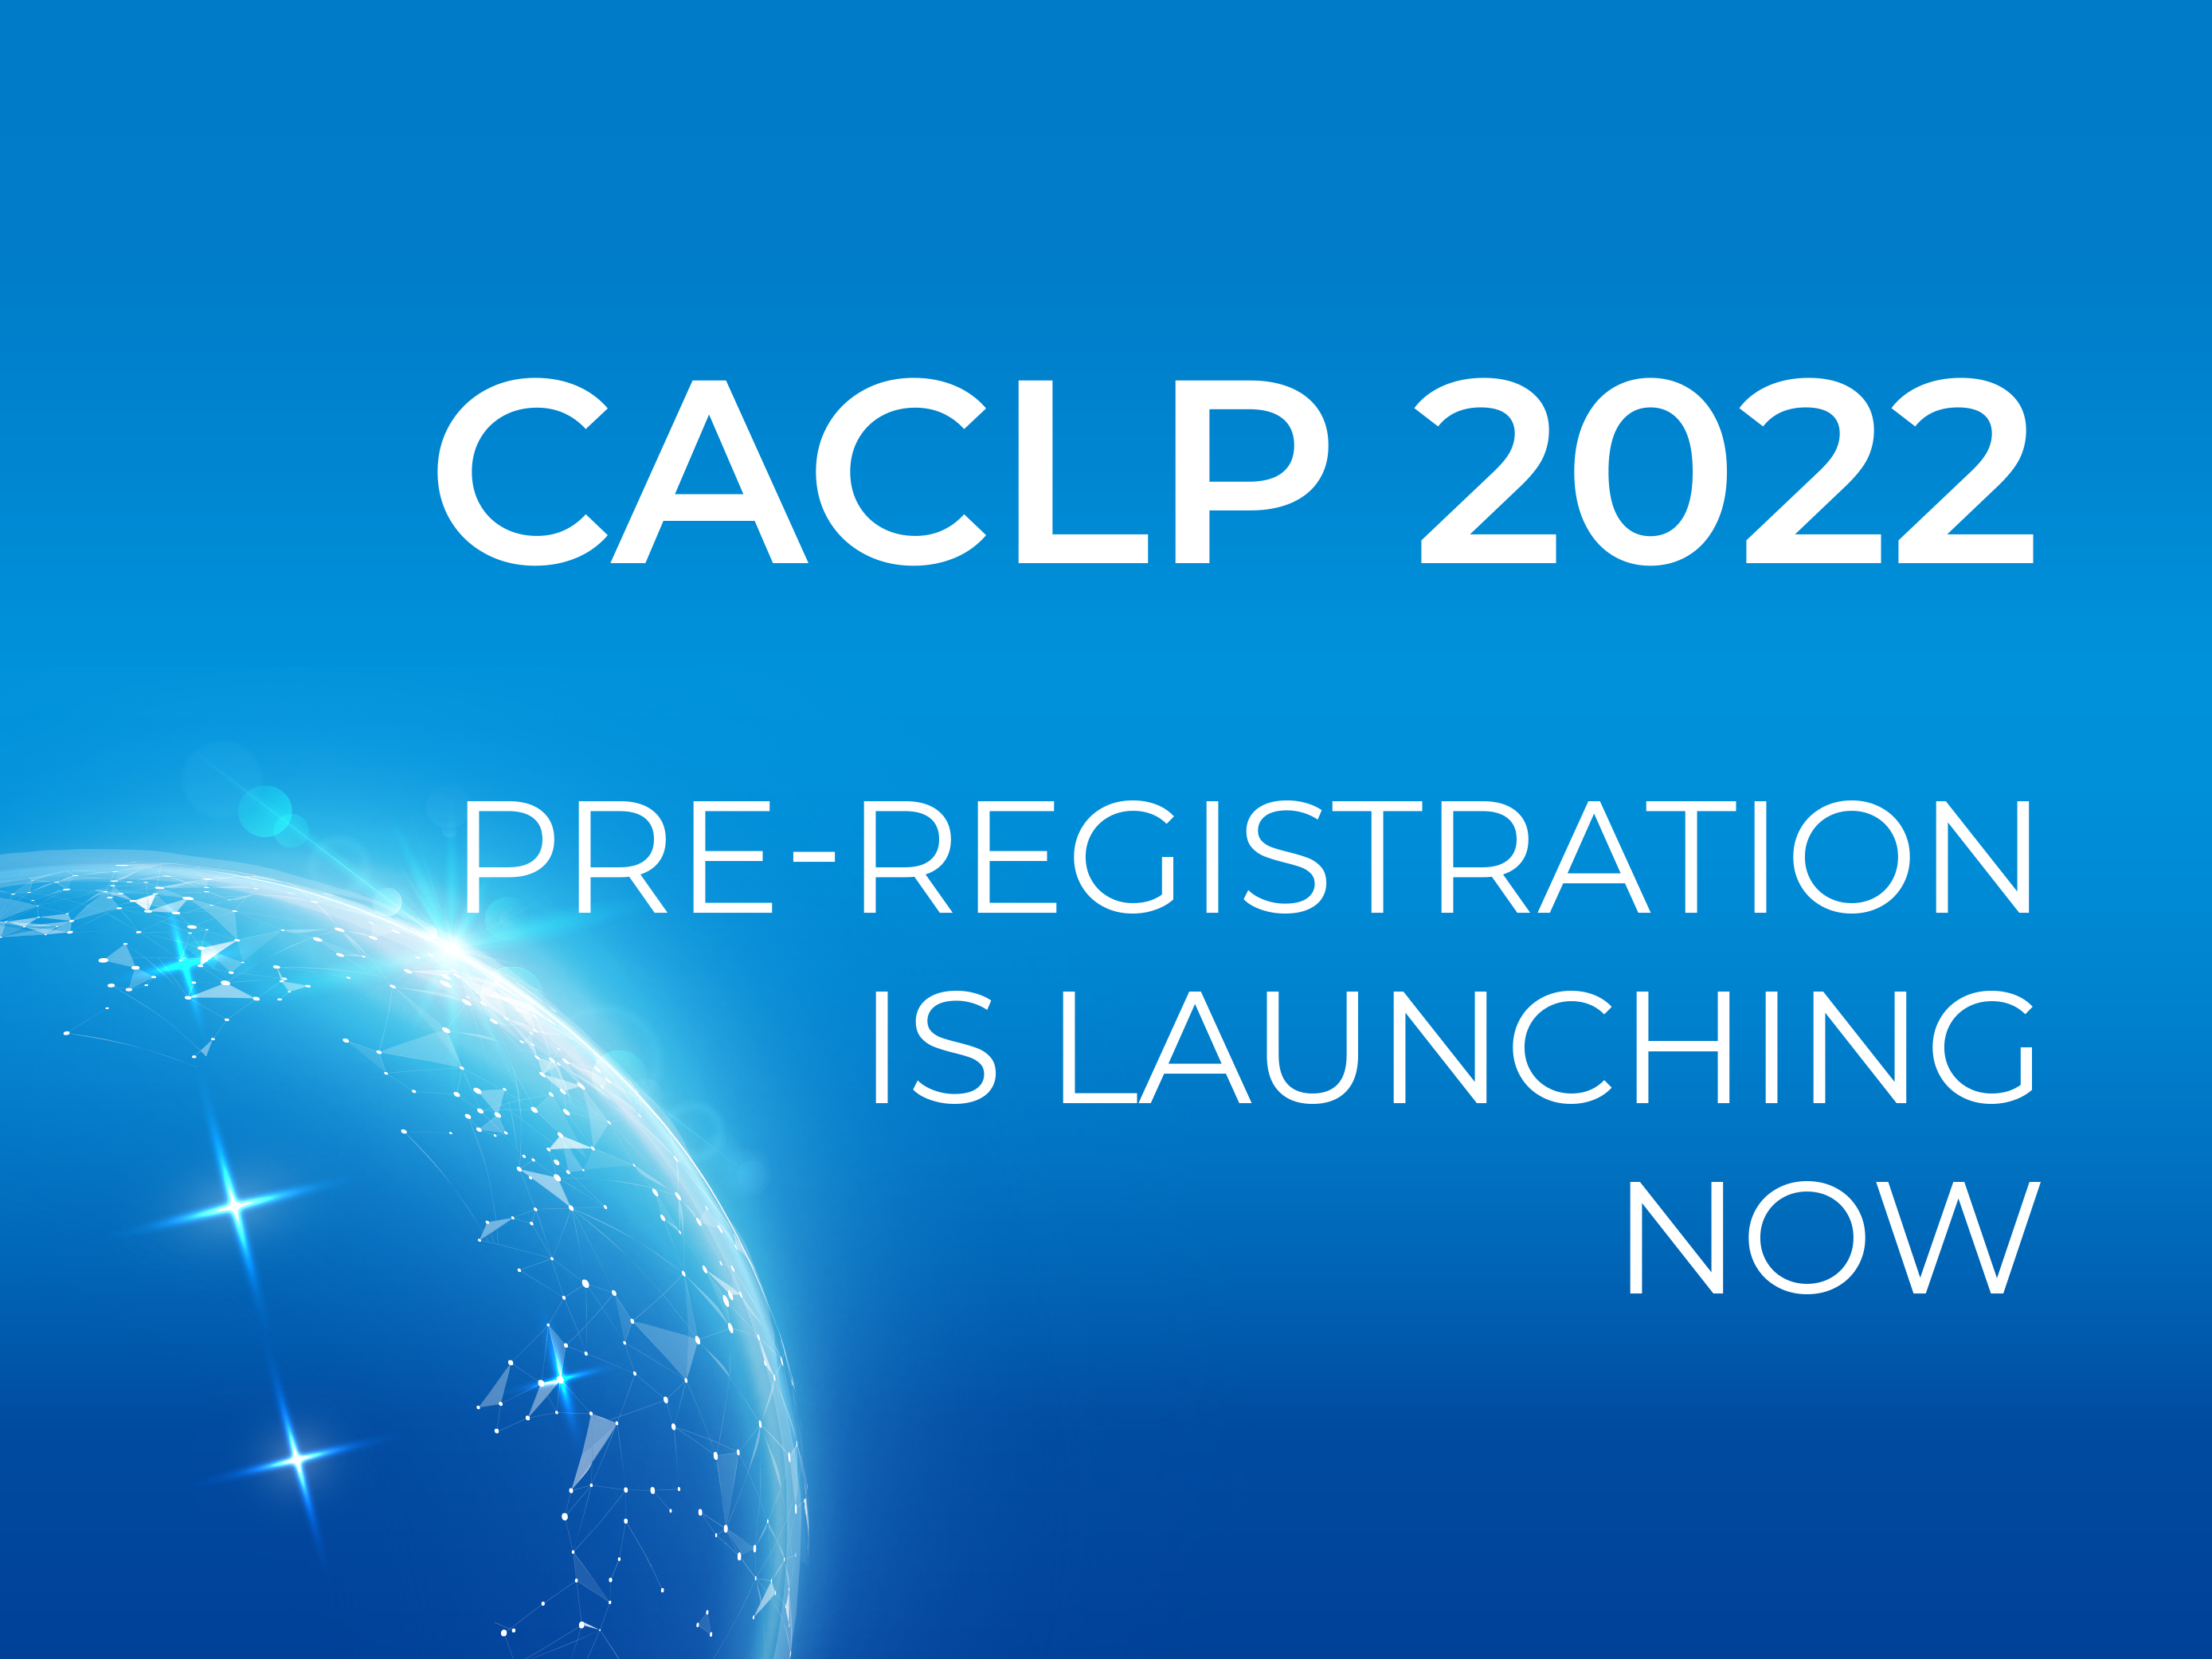 PRE-REGISTRATION FOR CACLP 2022 IS LAUNCHING